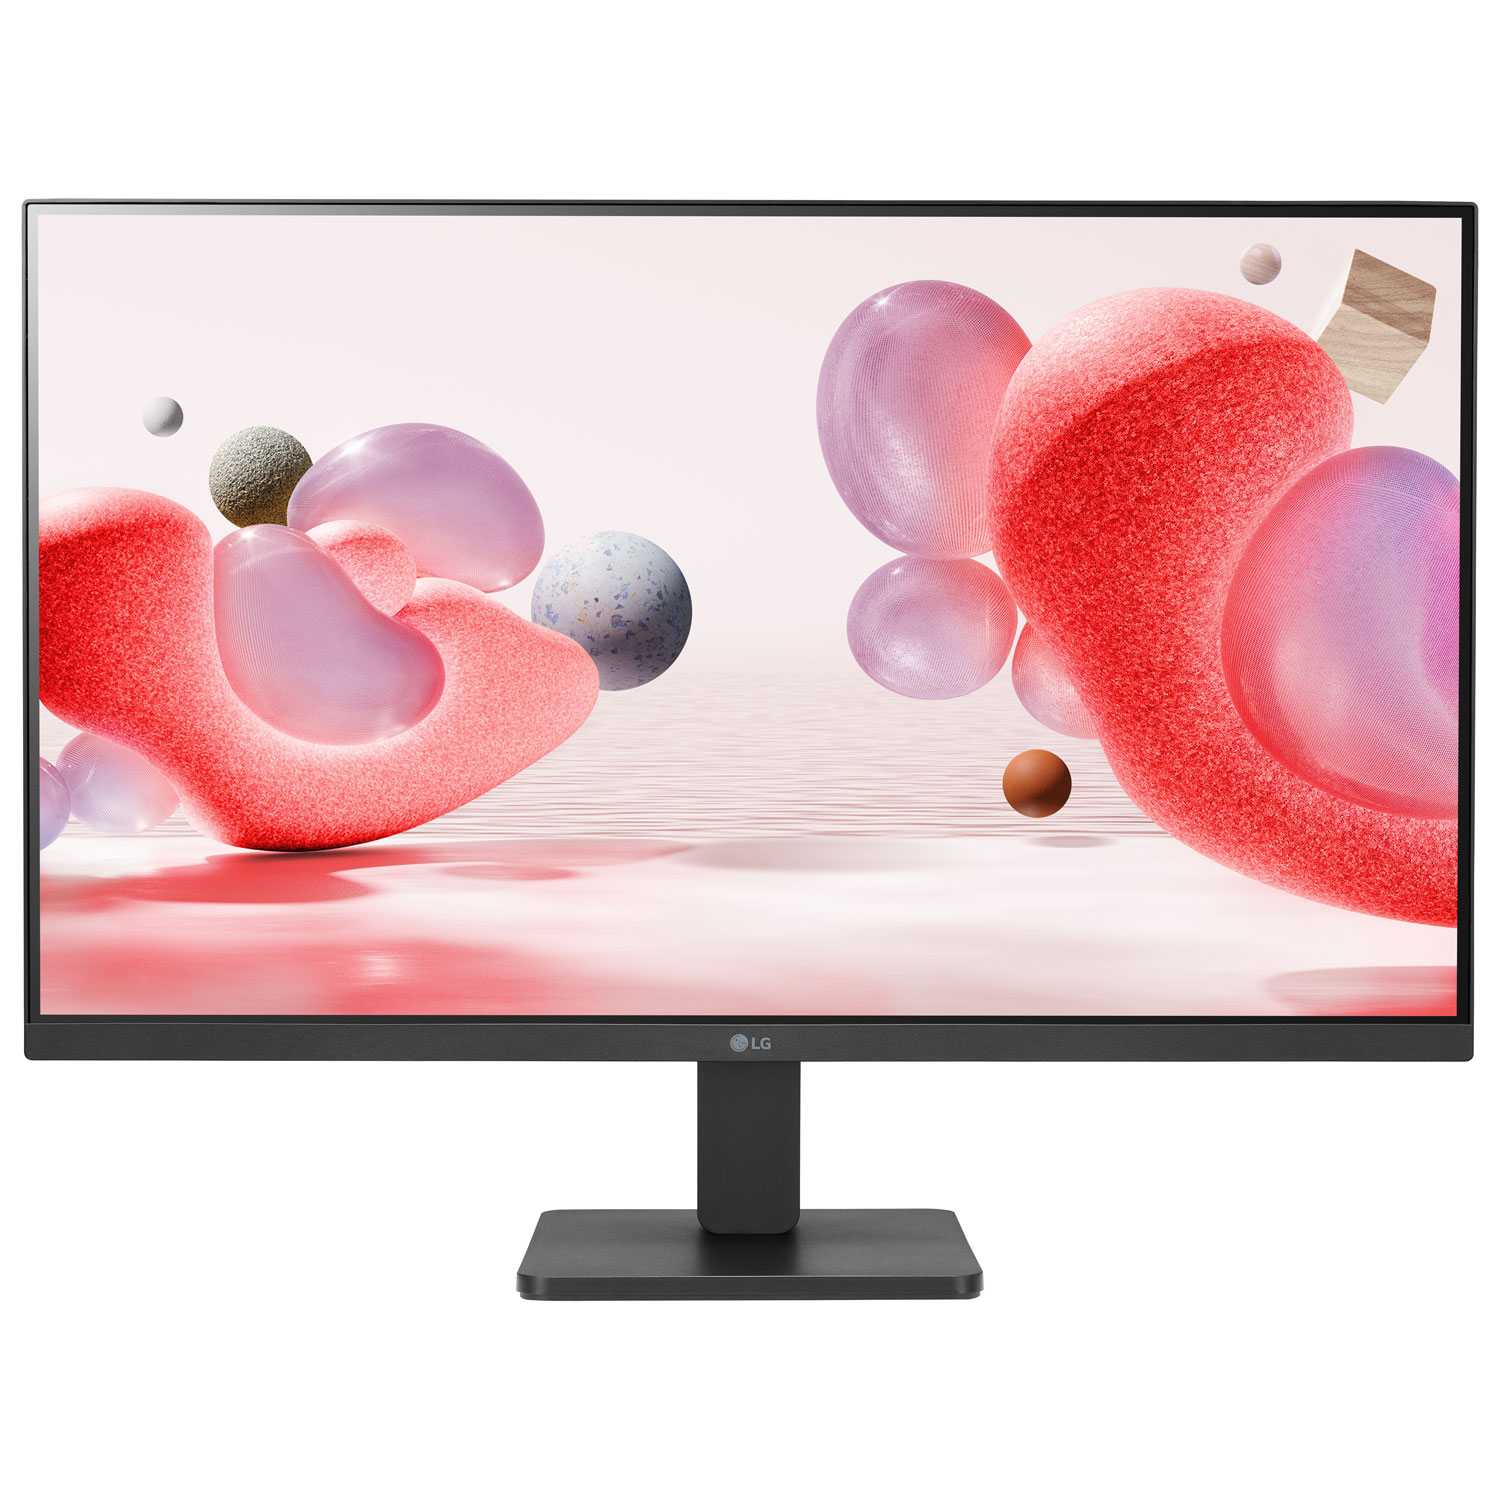 LG 24" FHD 100Hz 5ms GTG IPS LCD FreeSync Gaming Monitor (24MR41A-B) - Only at Best Buy